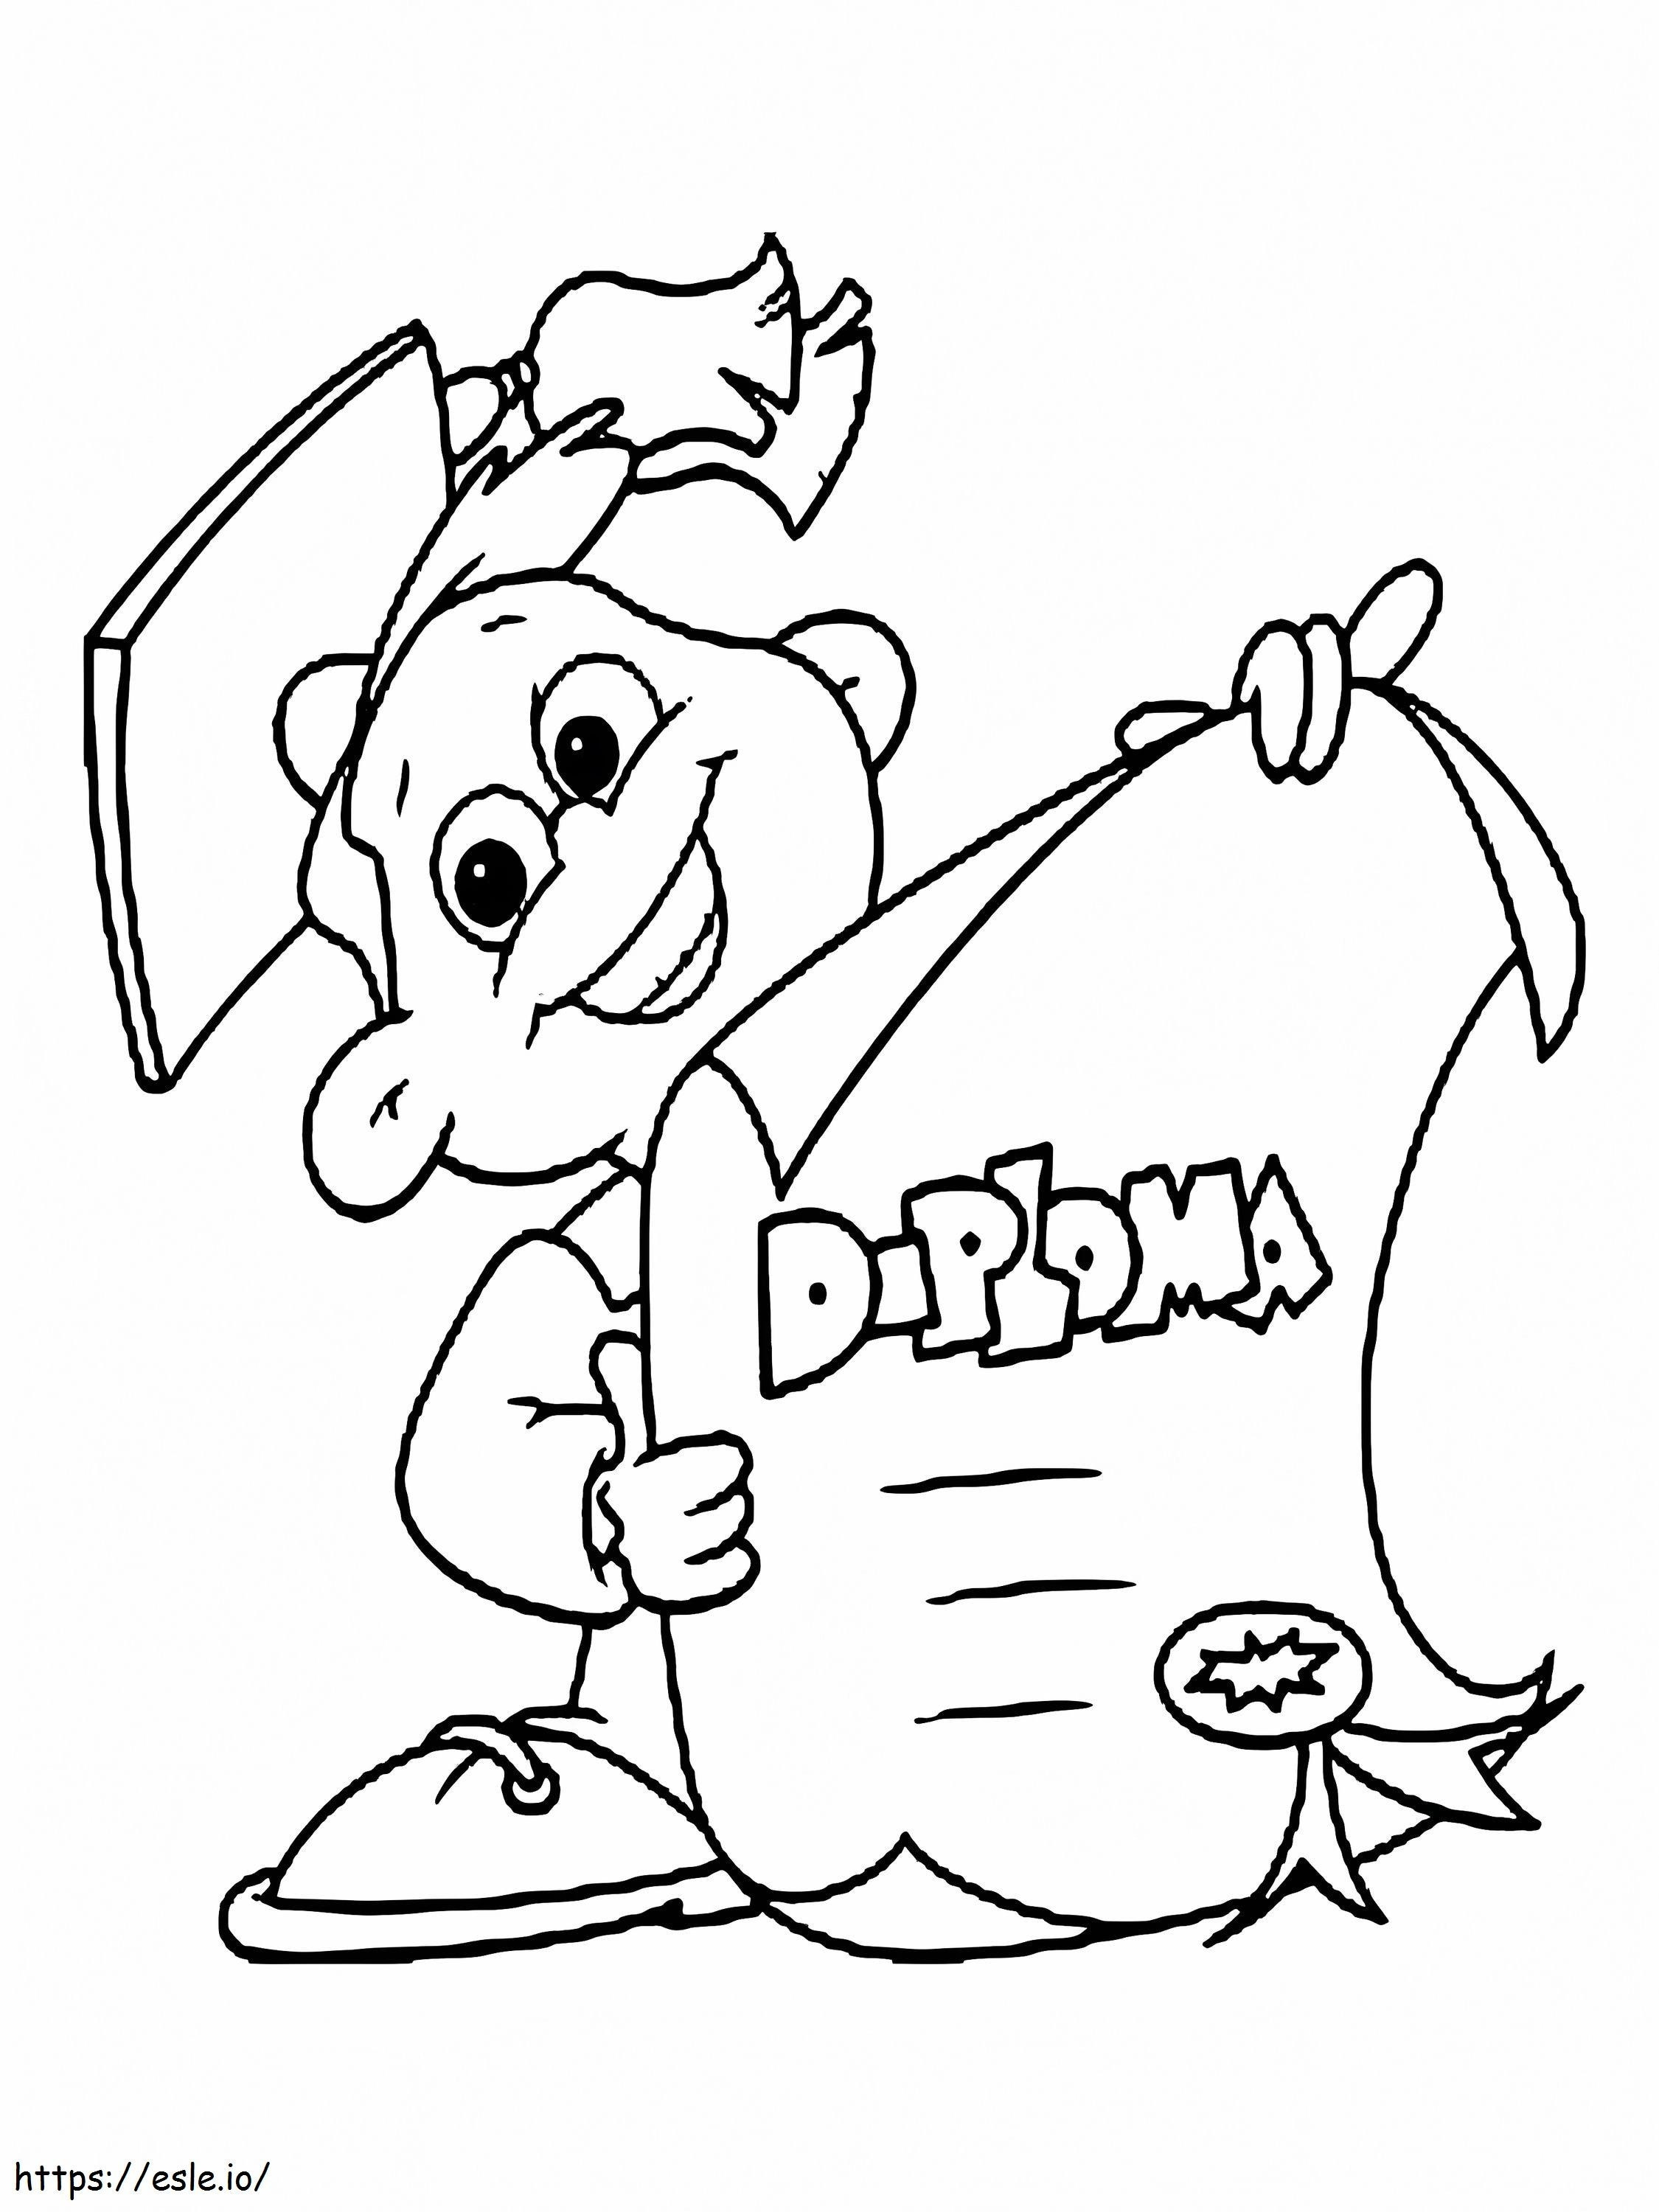 Boy With Diploma coloring page